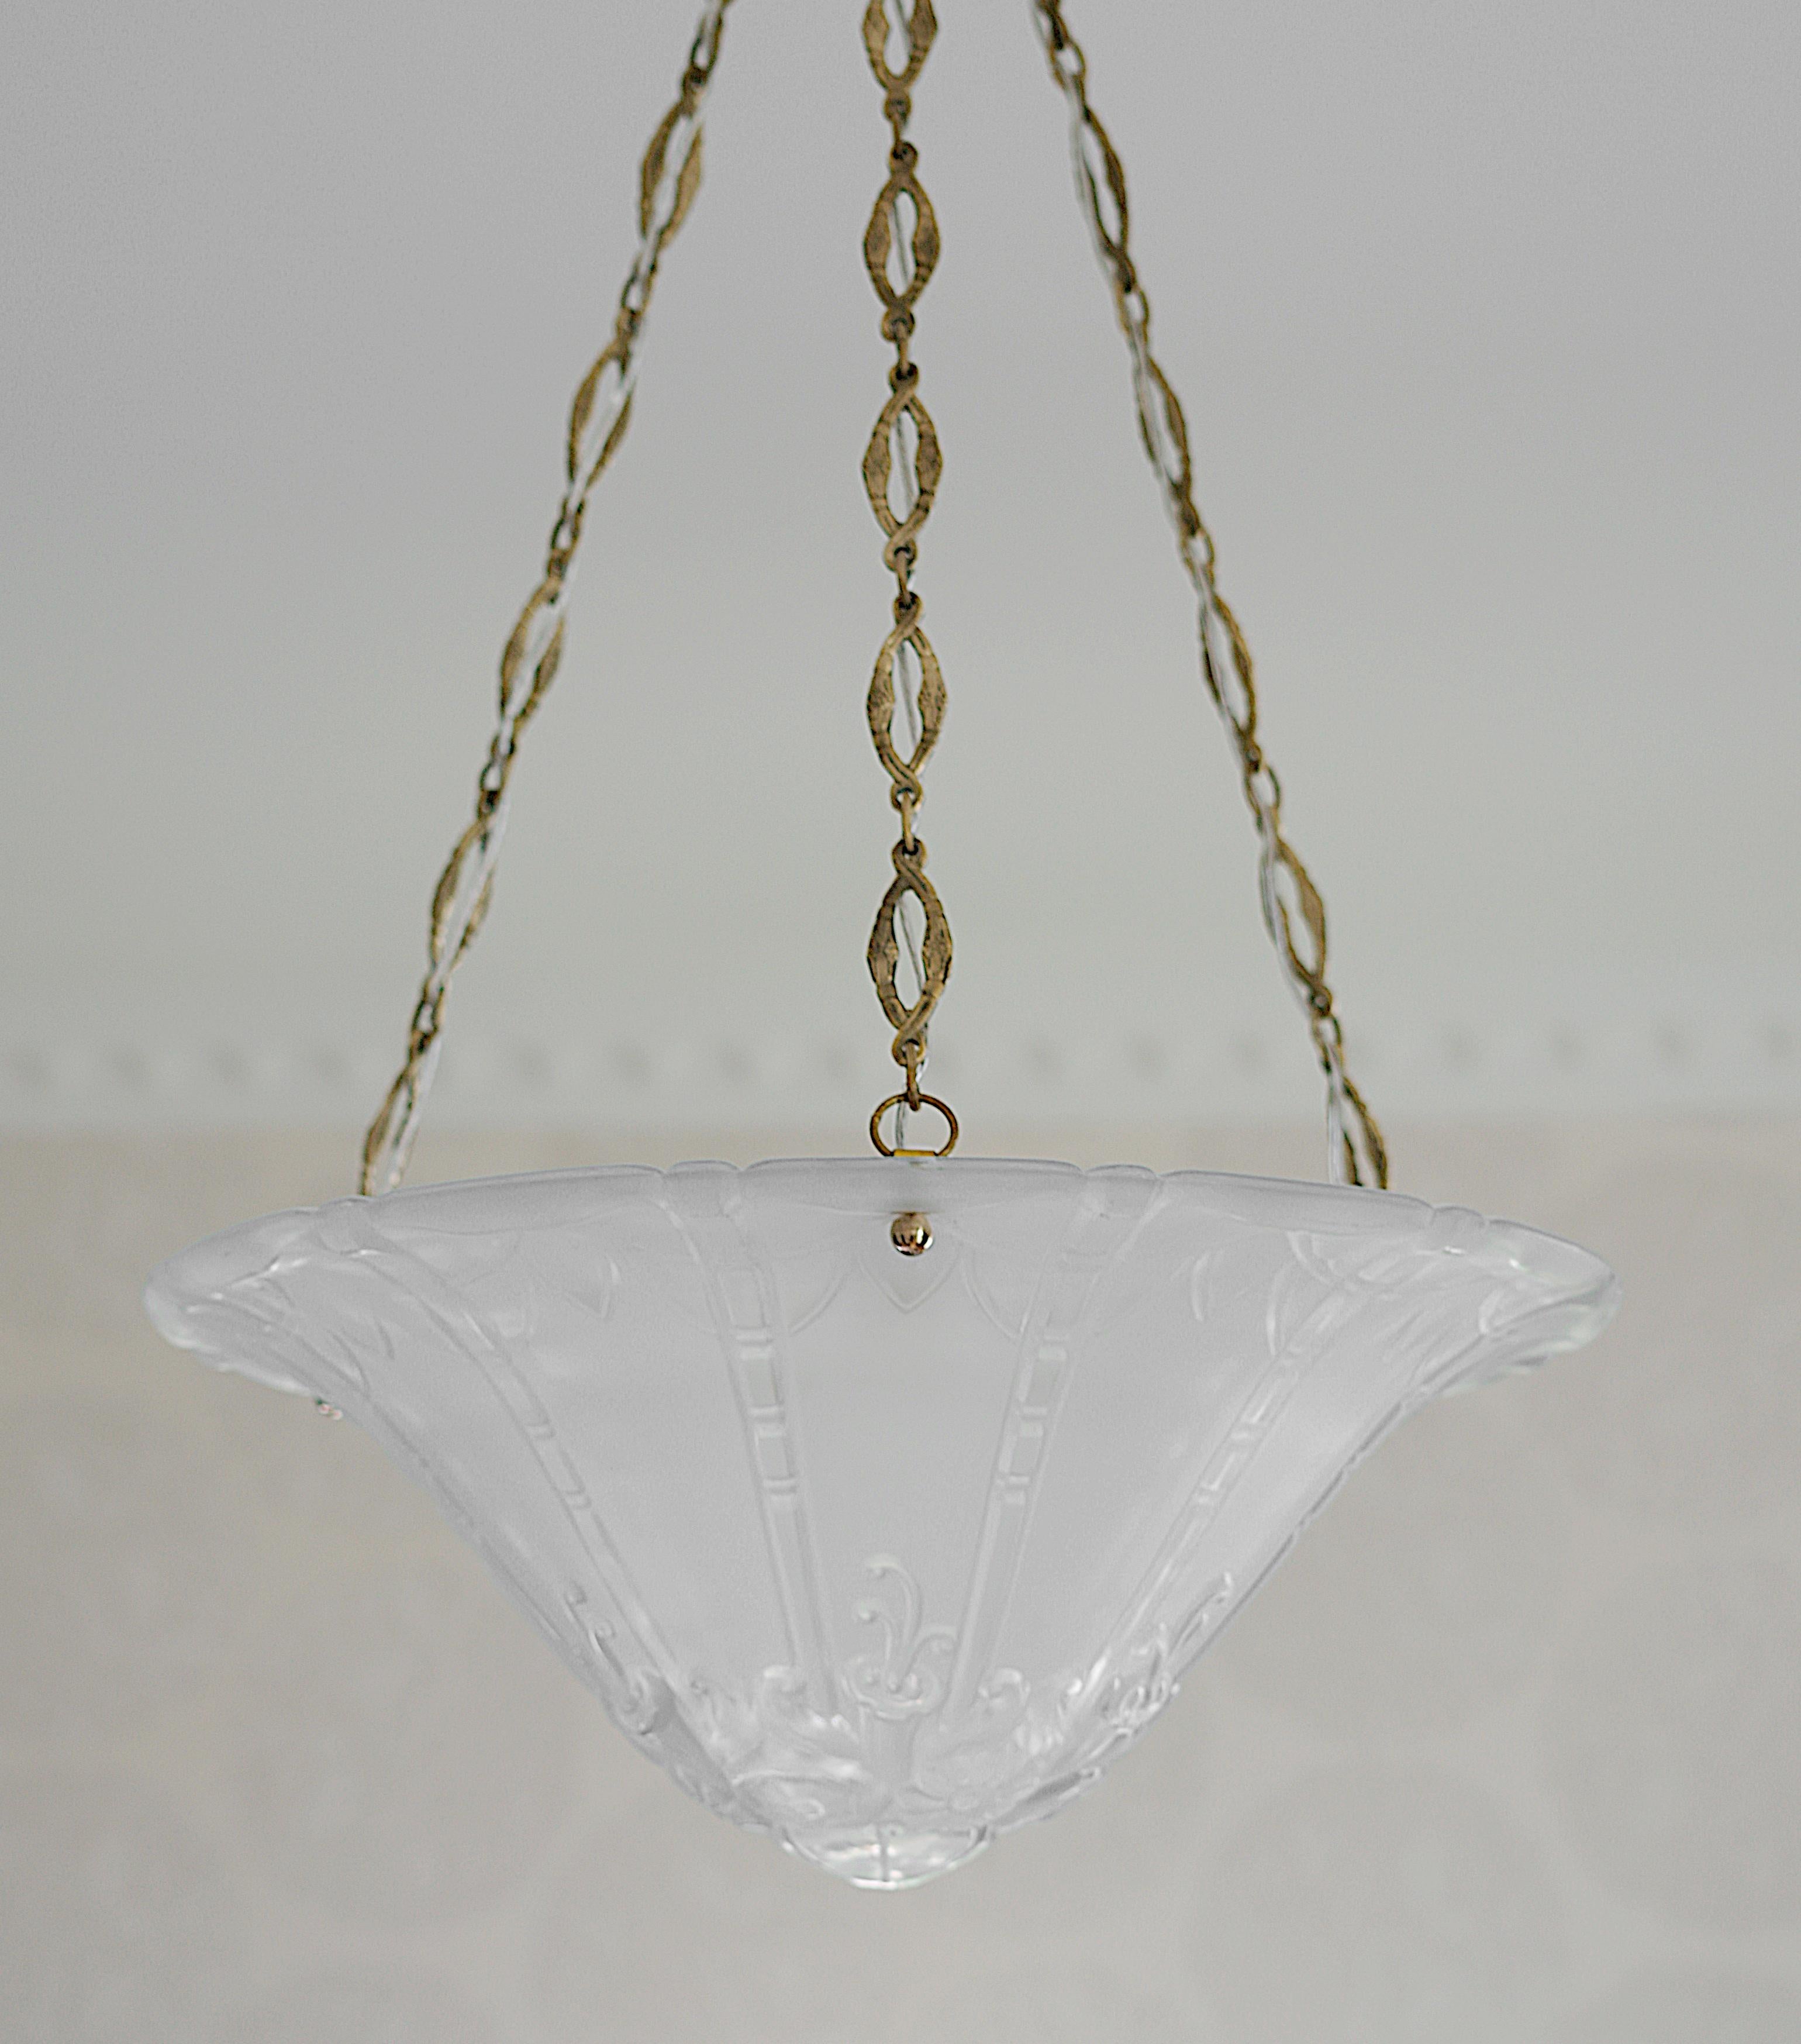 Daum Pierre D'Avesn Large French Art Deco Pendant Chandelier, Early 1930s For Sale 2